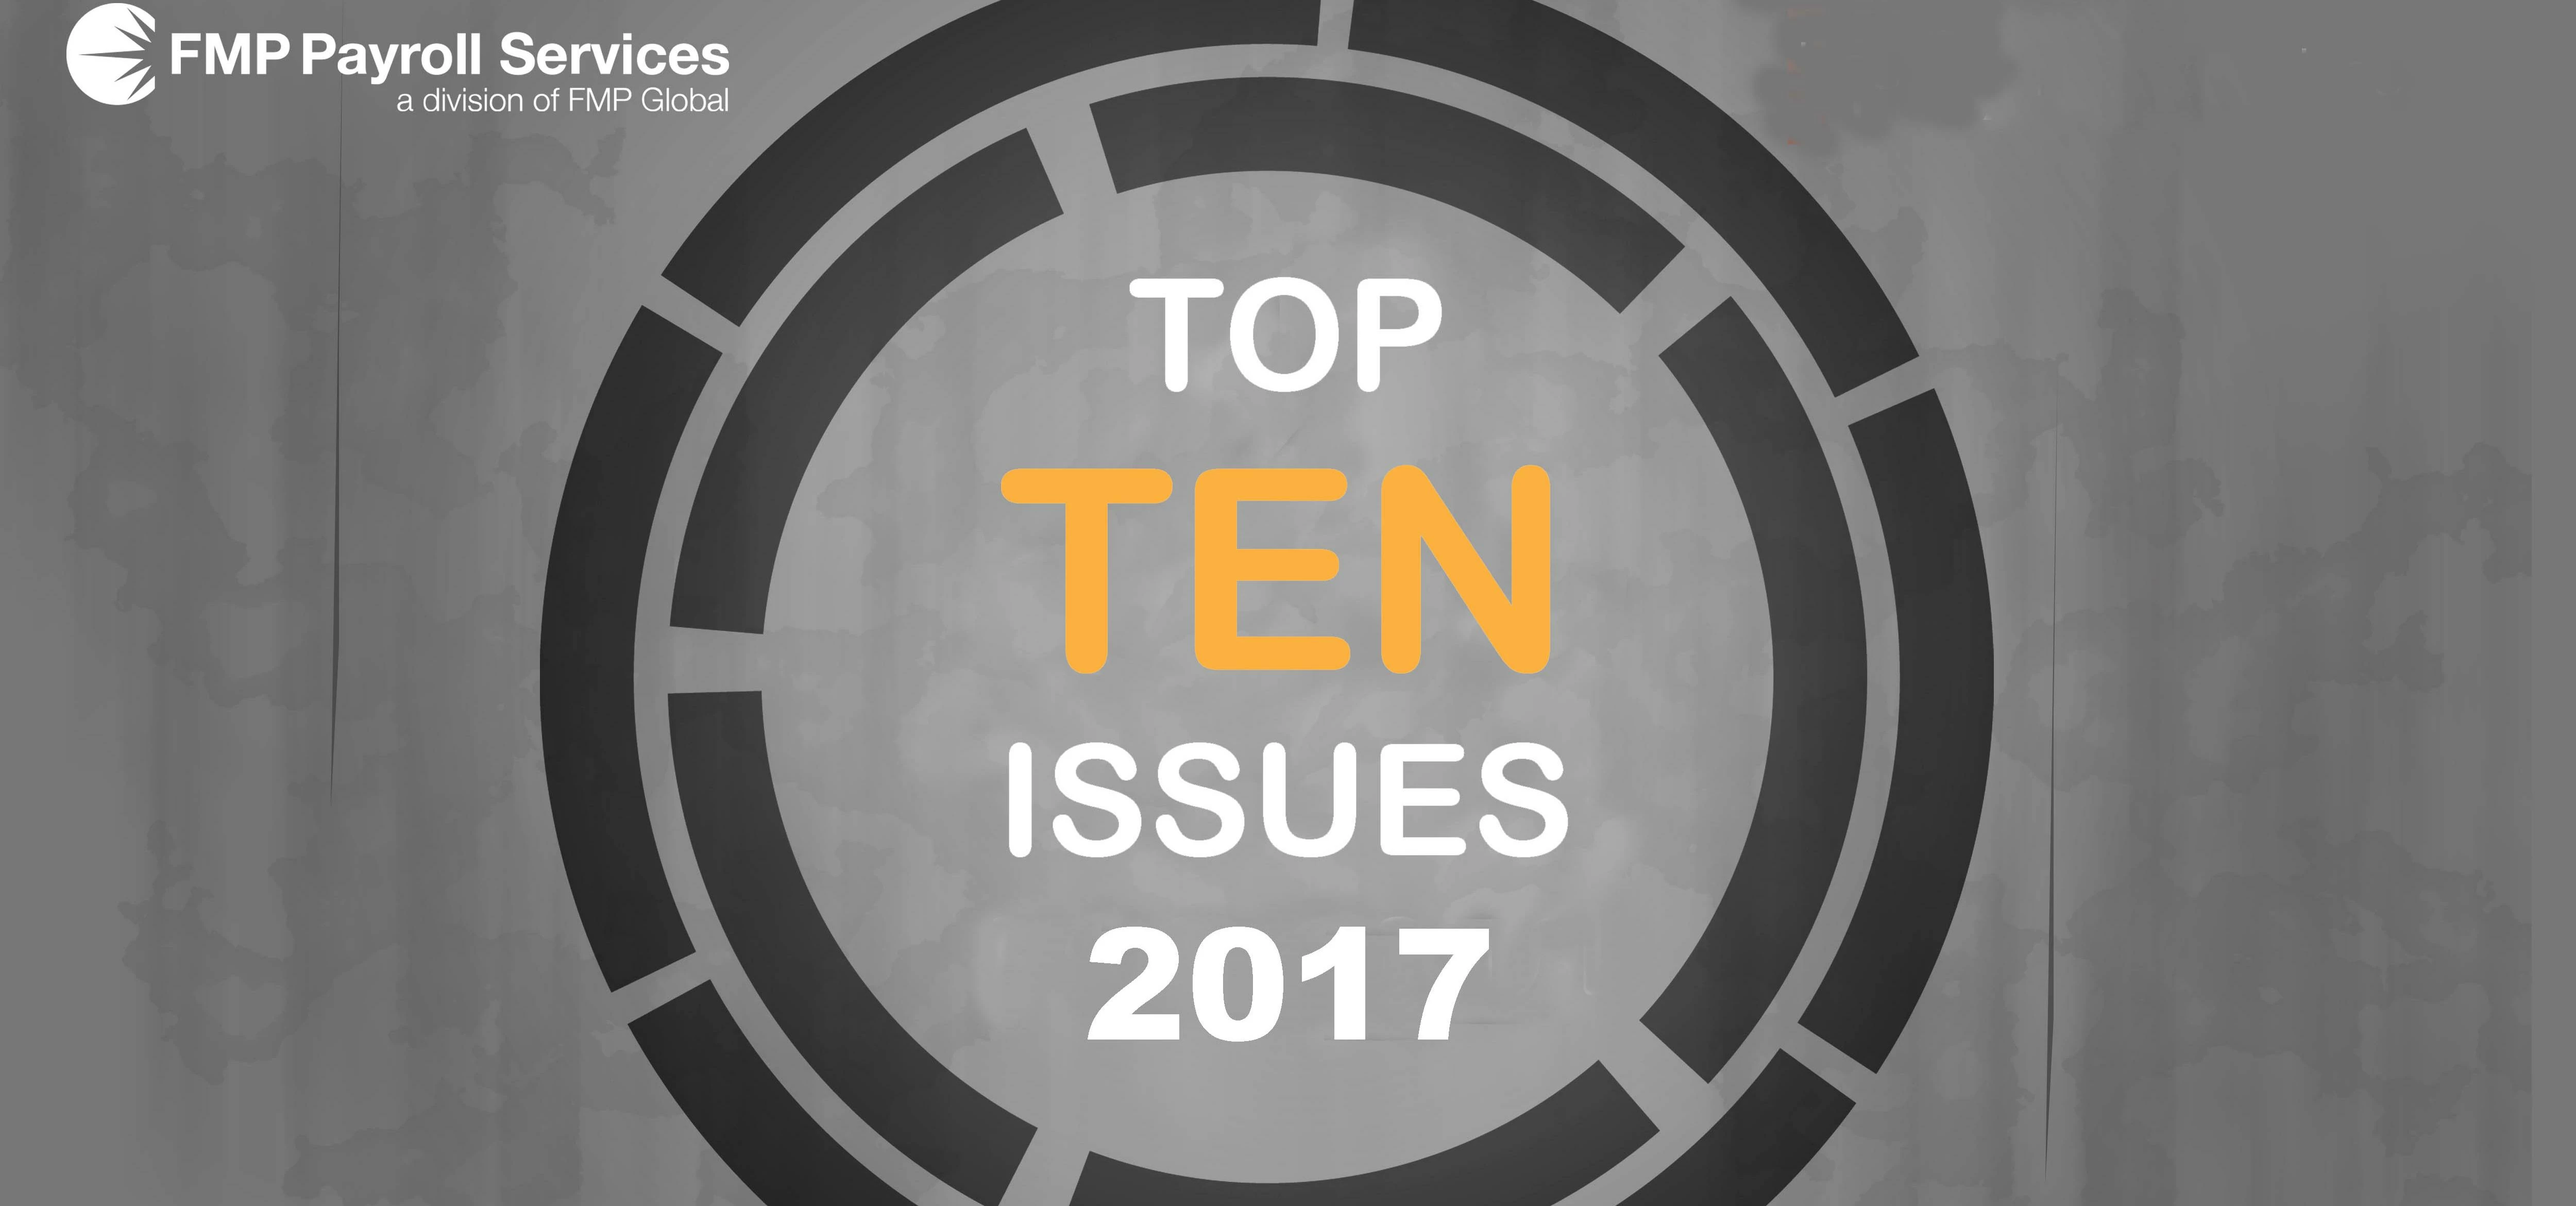 Top 10 Payroll Issues for 2017